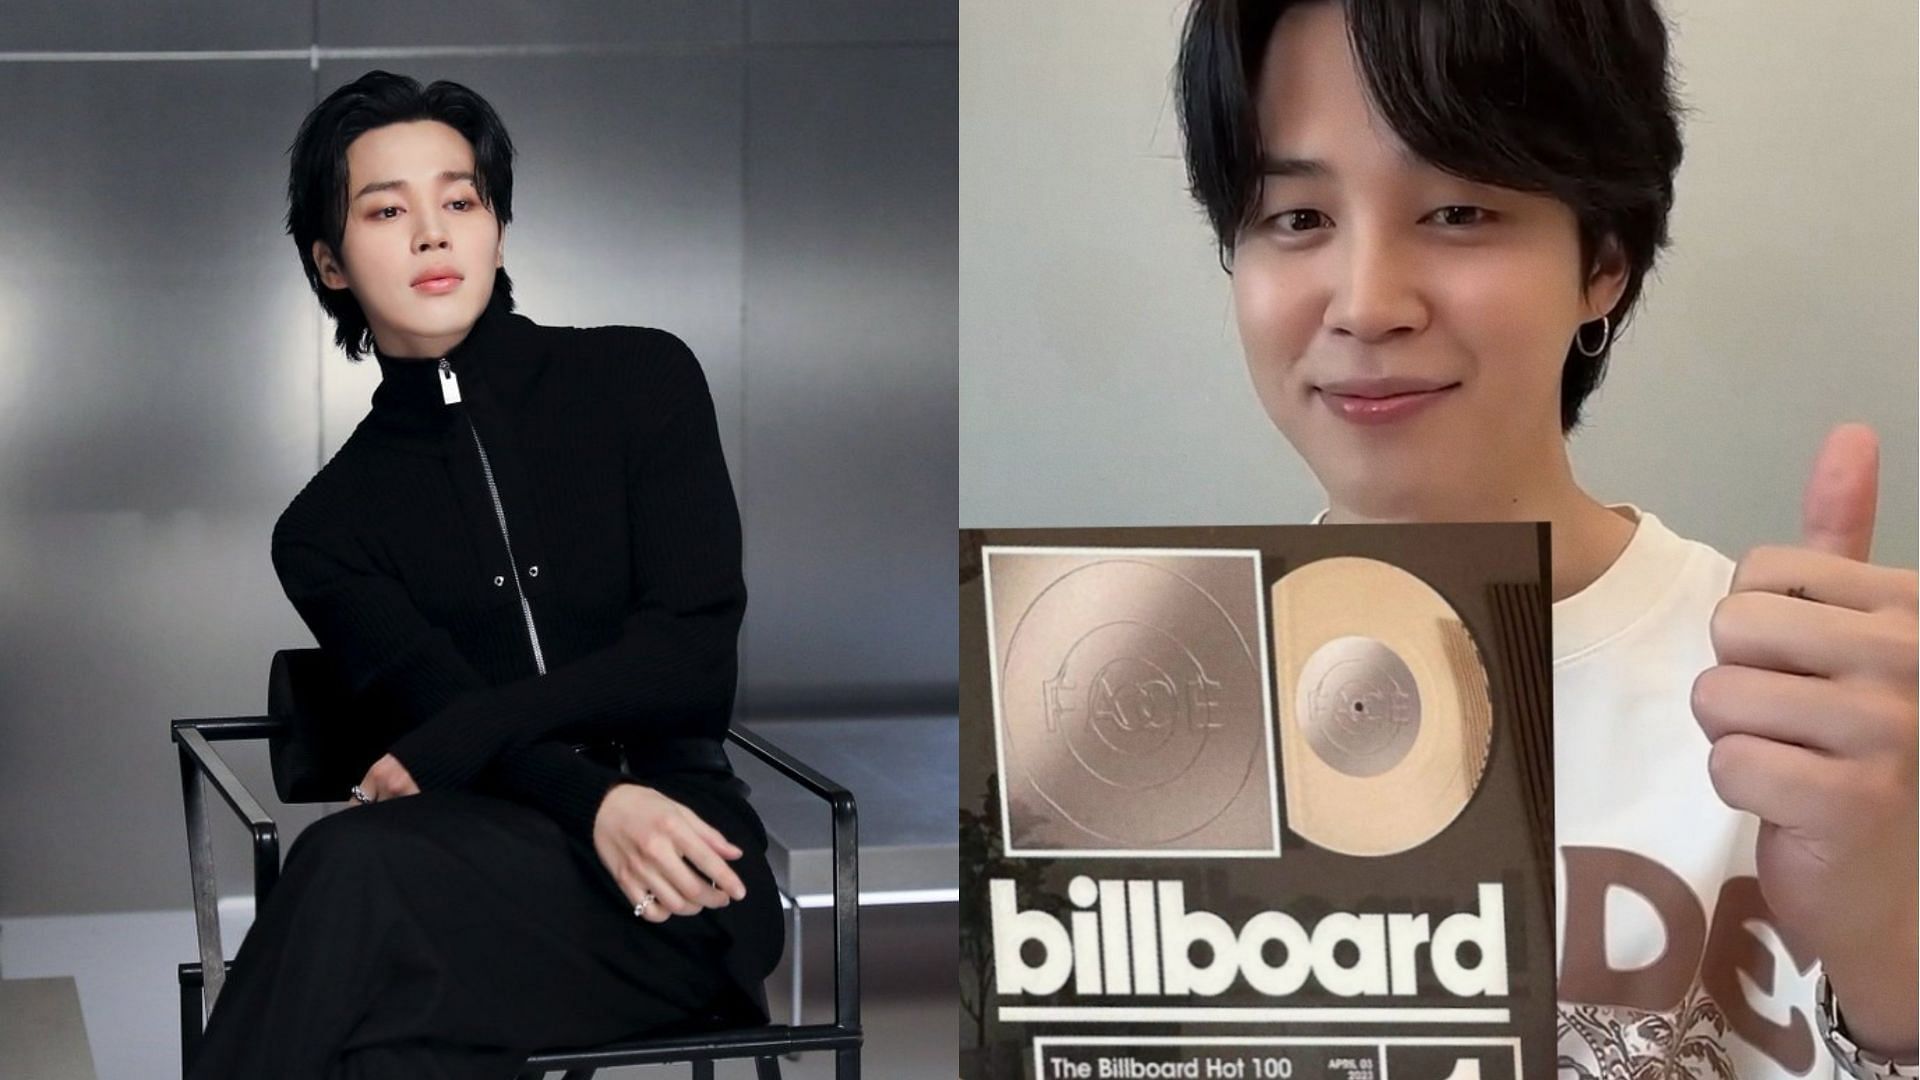 Jimin is writing history” - Fans celebrate as BTS member becomes the first  Korean soloist to reach 1 Billion streams on Spotify with his album FACE